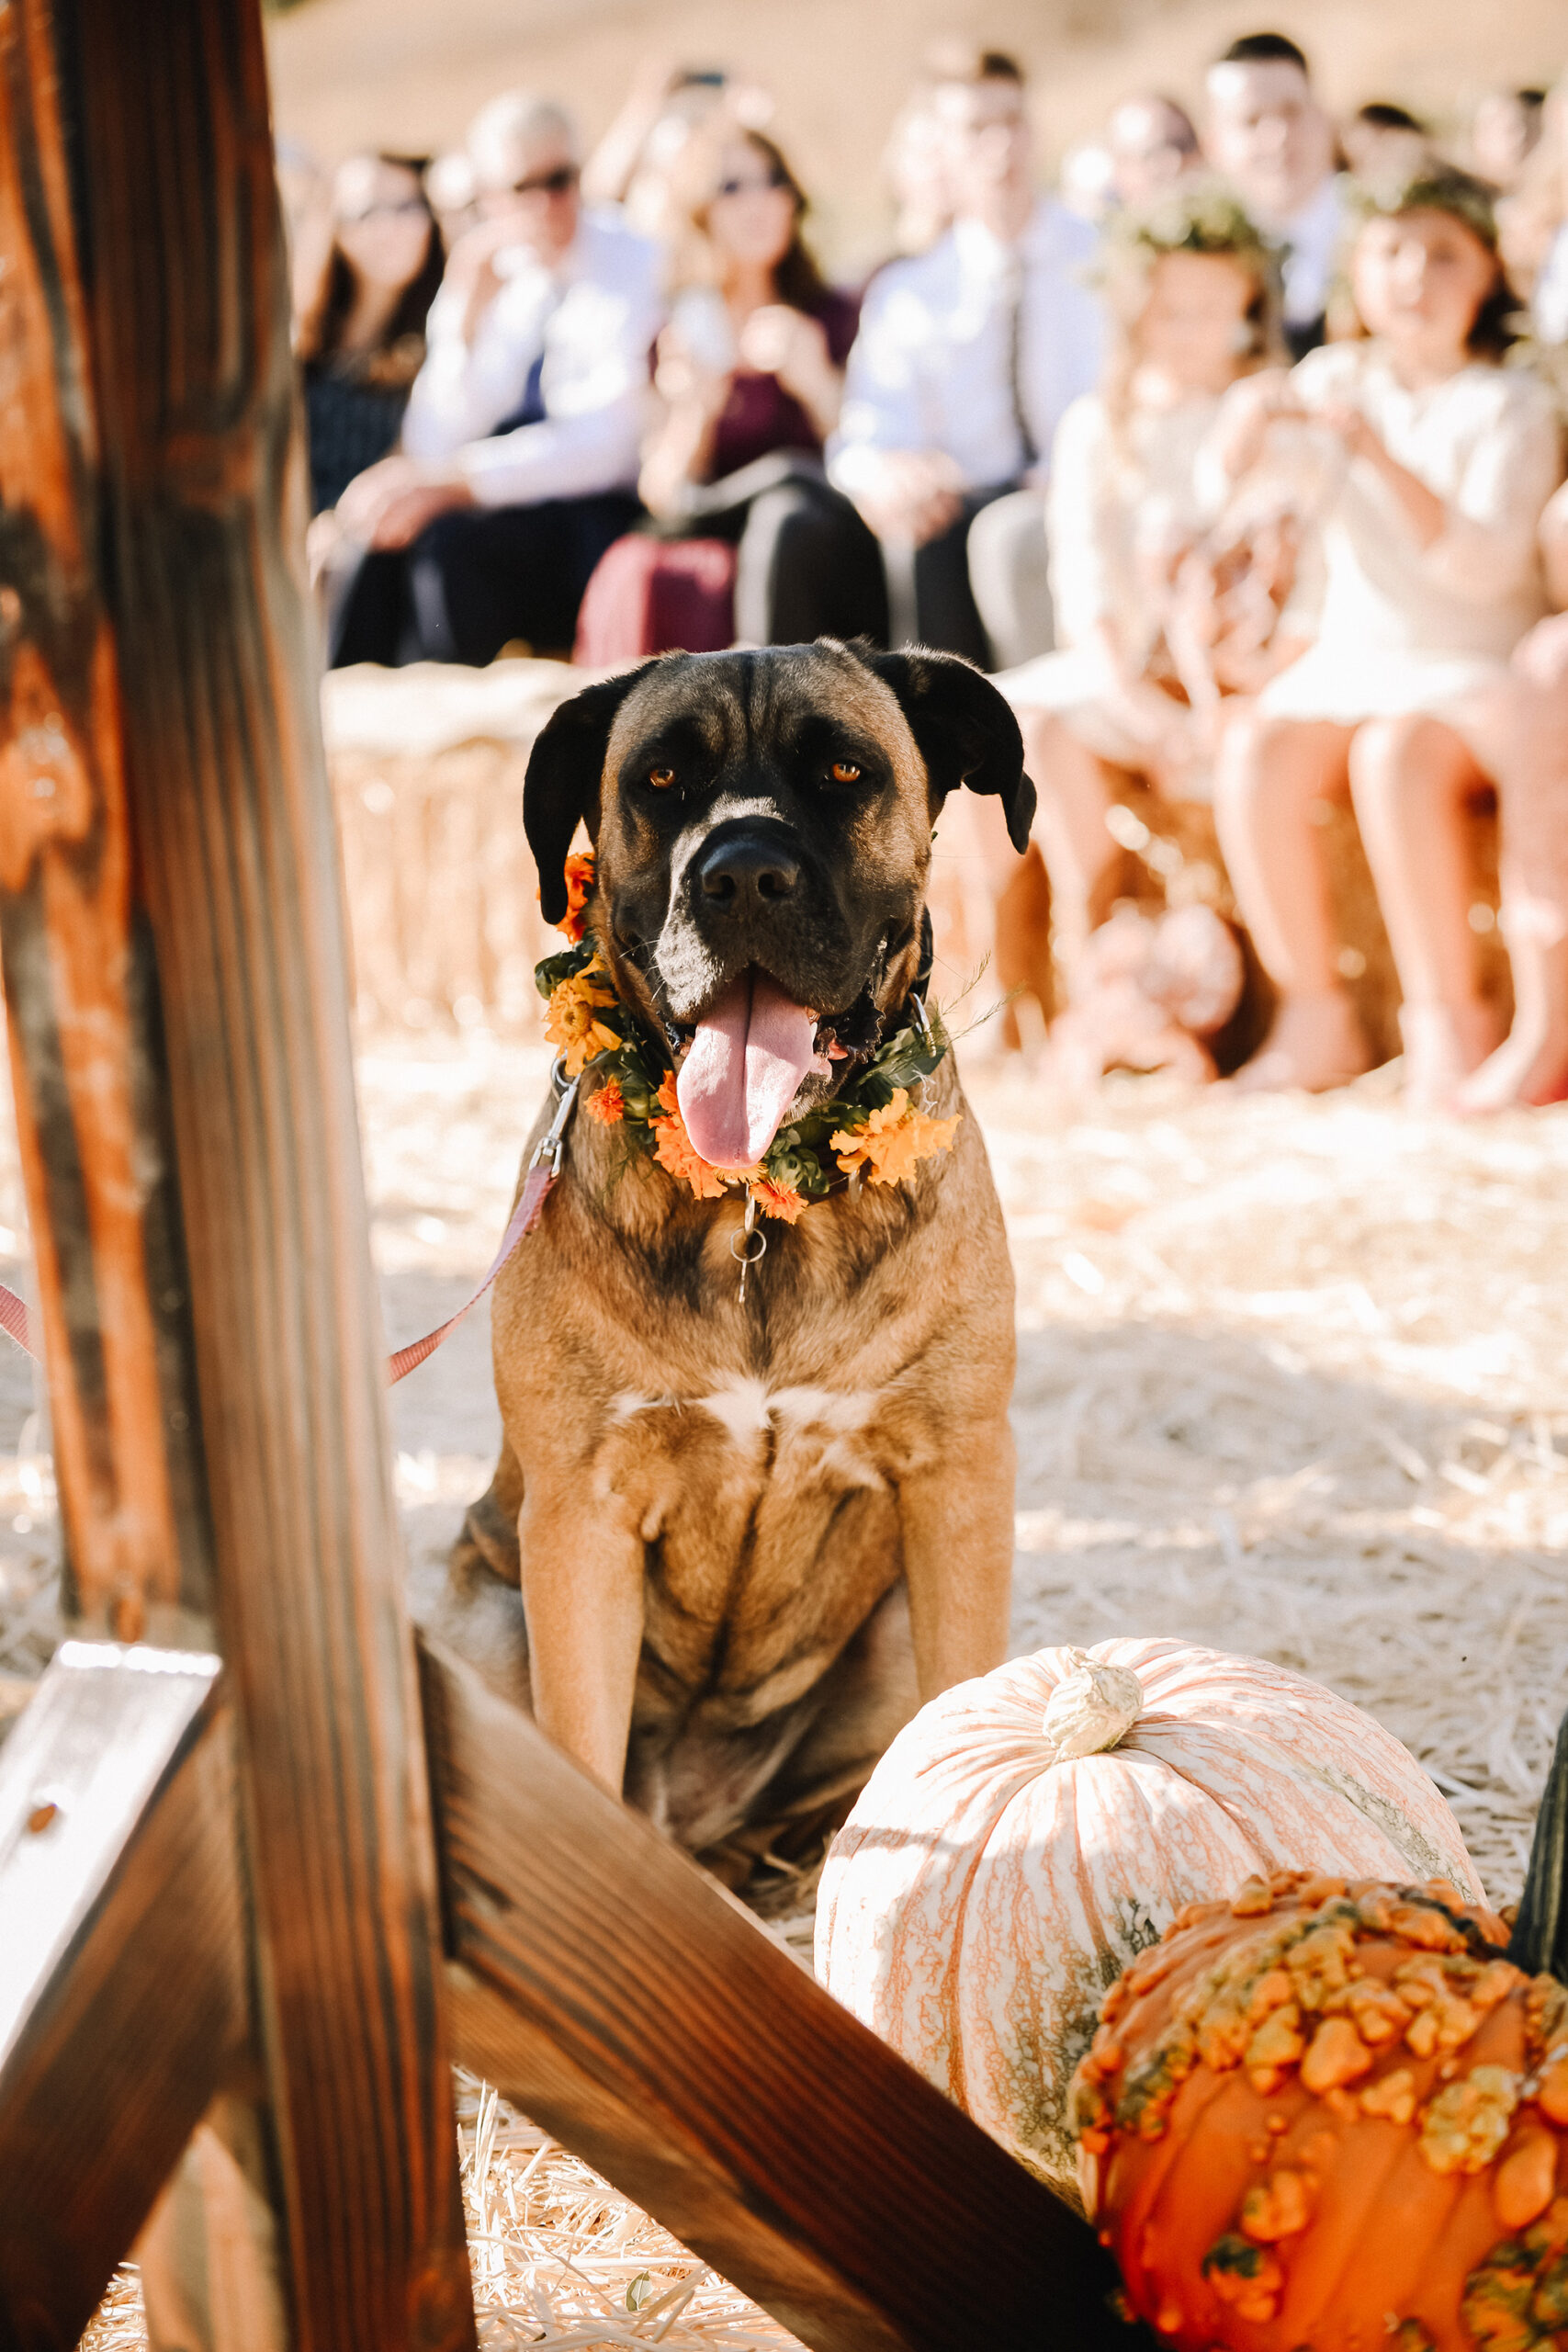 Kristen Carter Rustic Winery Wedding KDot Photography SBS 018 scaled